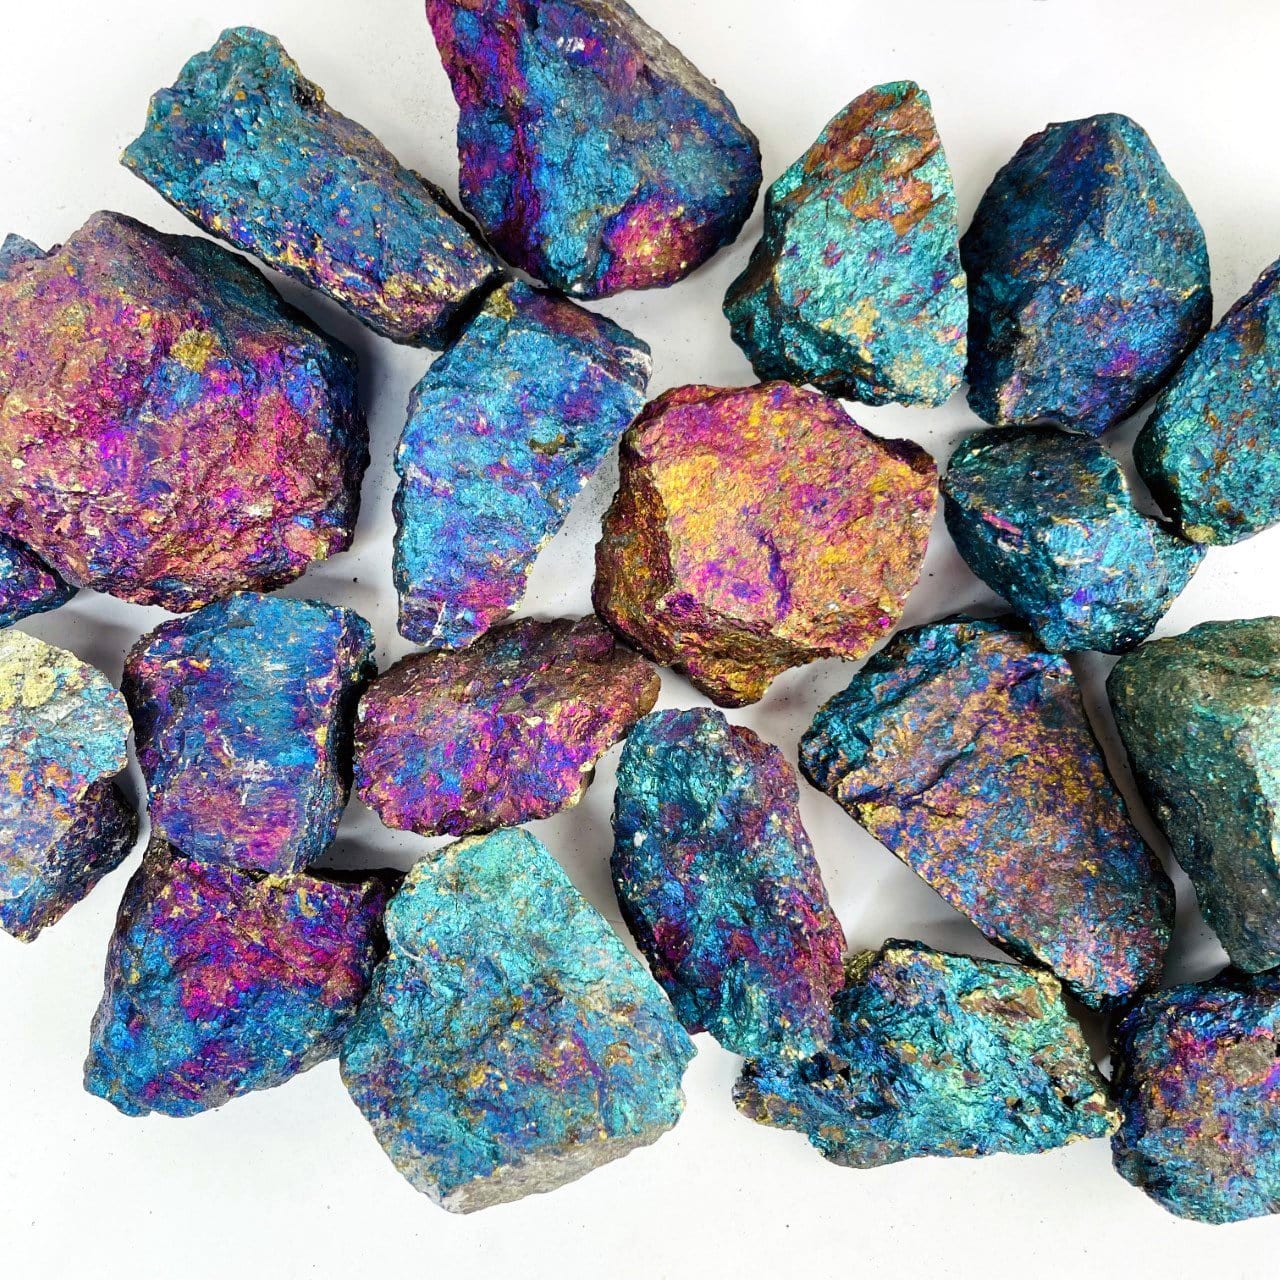 Close up of Peacock Ore rough stones beautiful shades of blue, purple, pink, and yellow